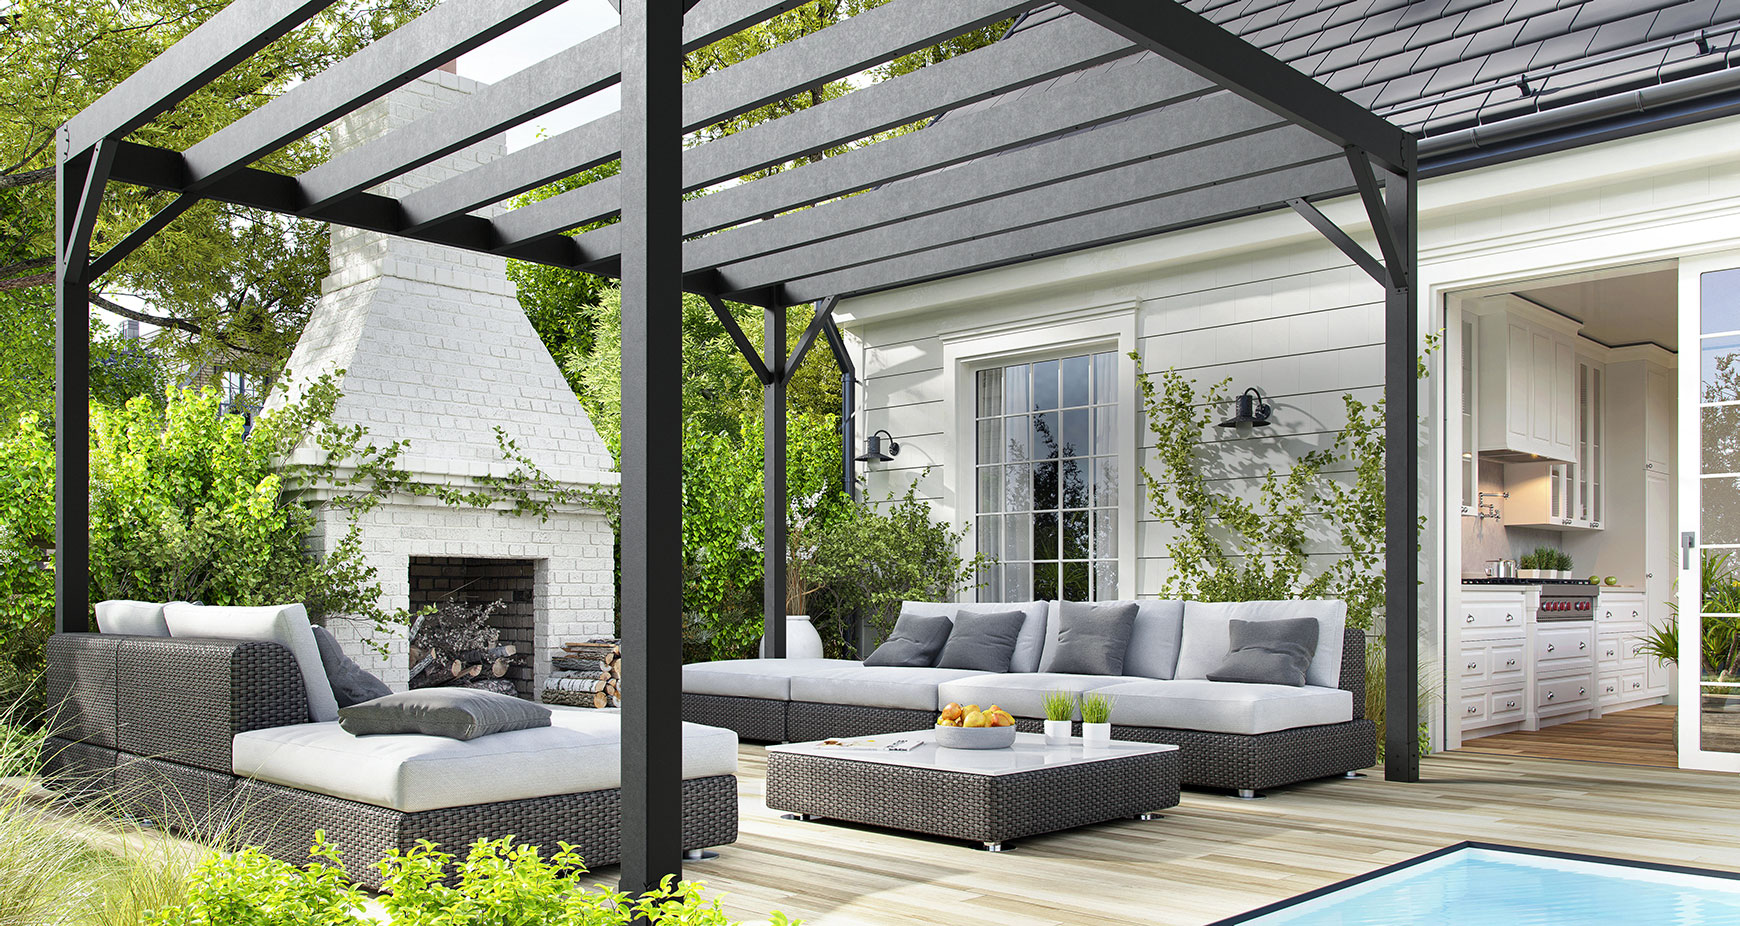 Modern pergola kit installed on a back patio next to a white brick fireplace and pool.